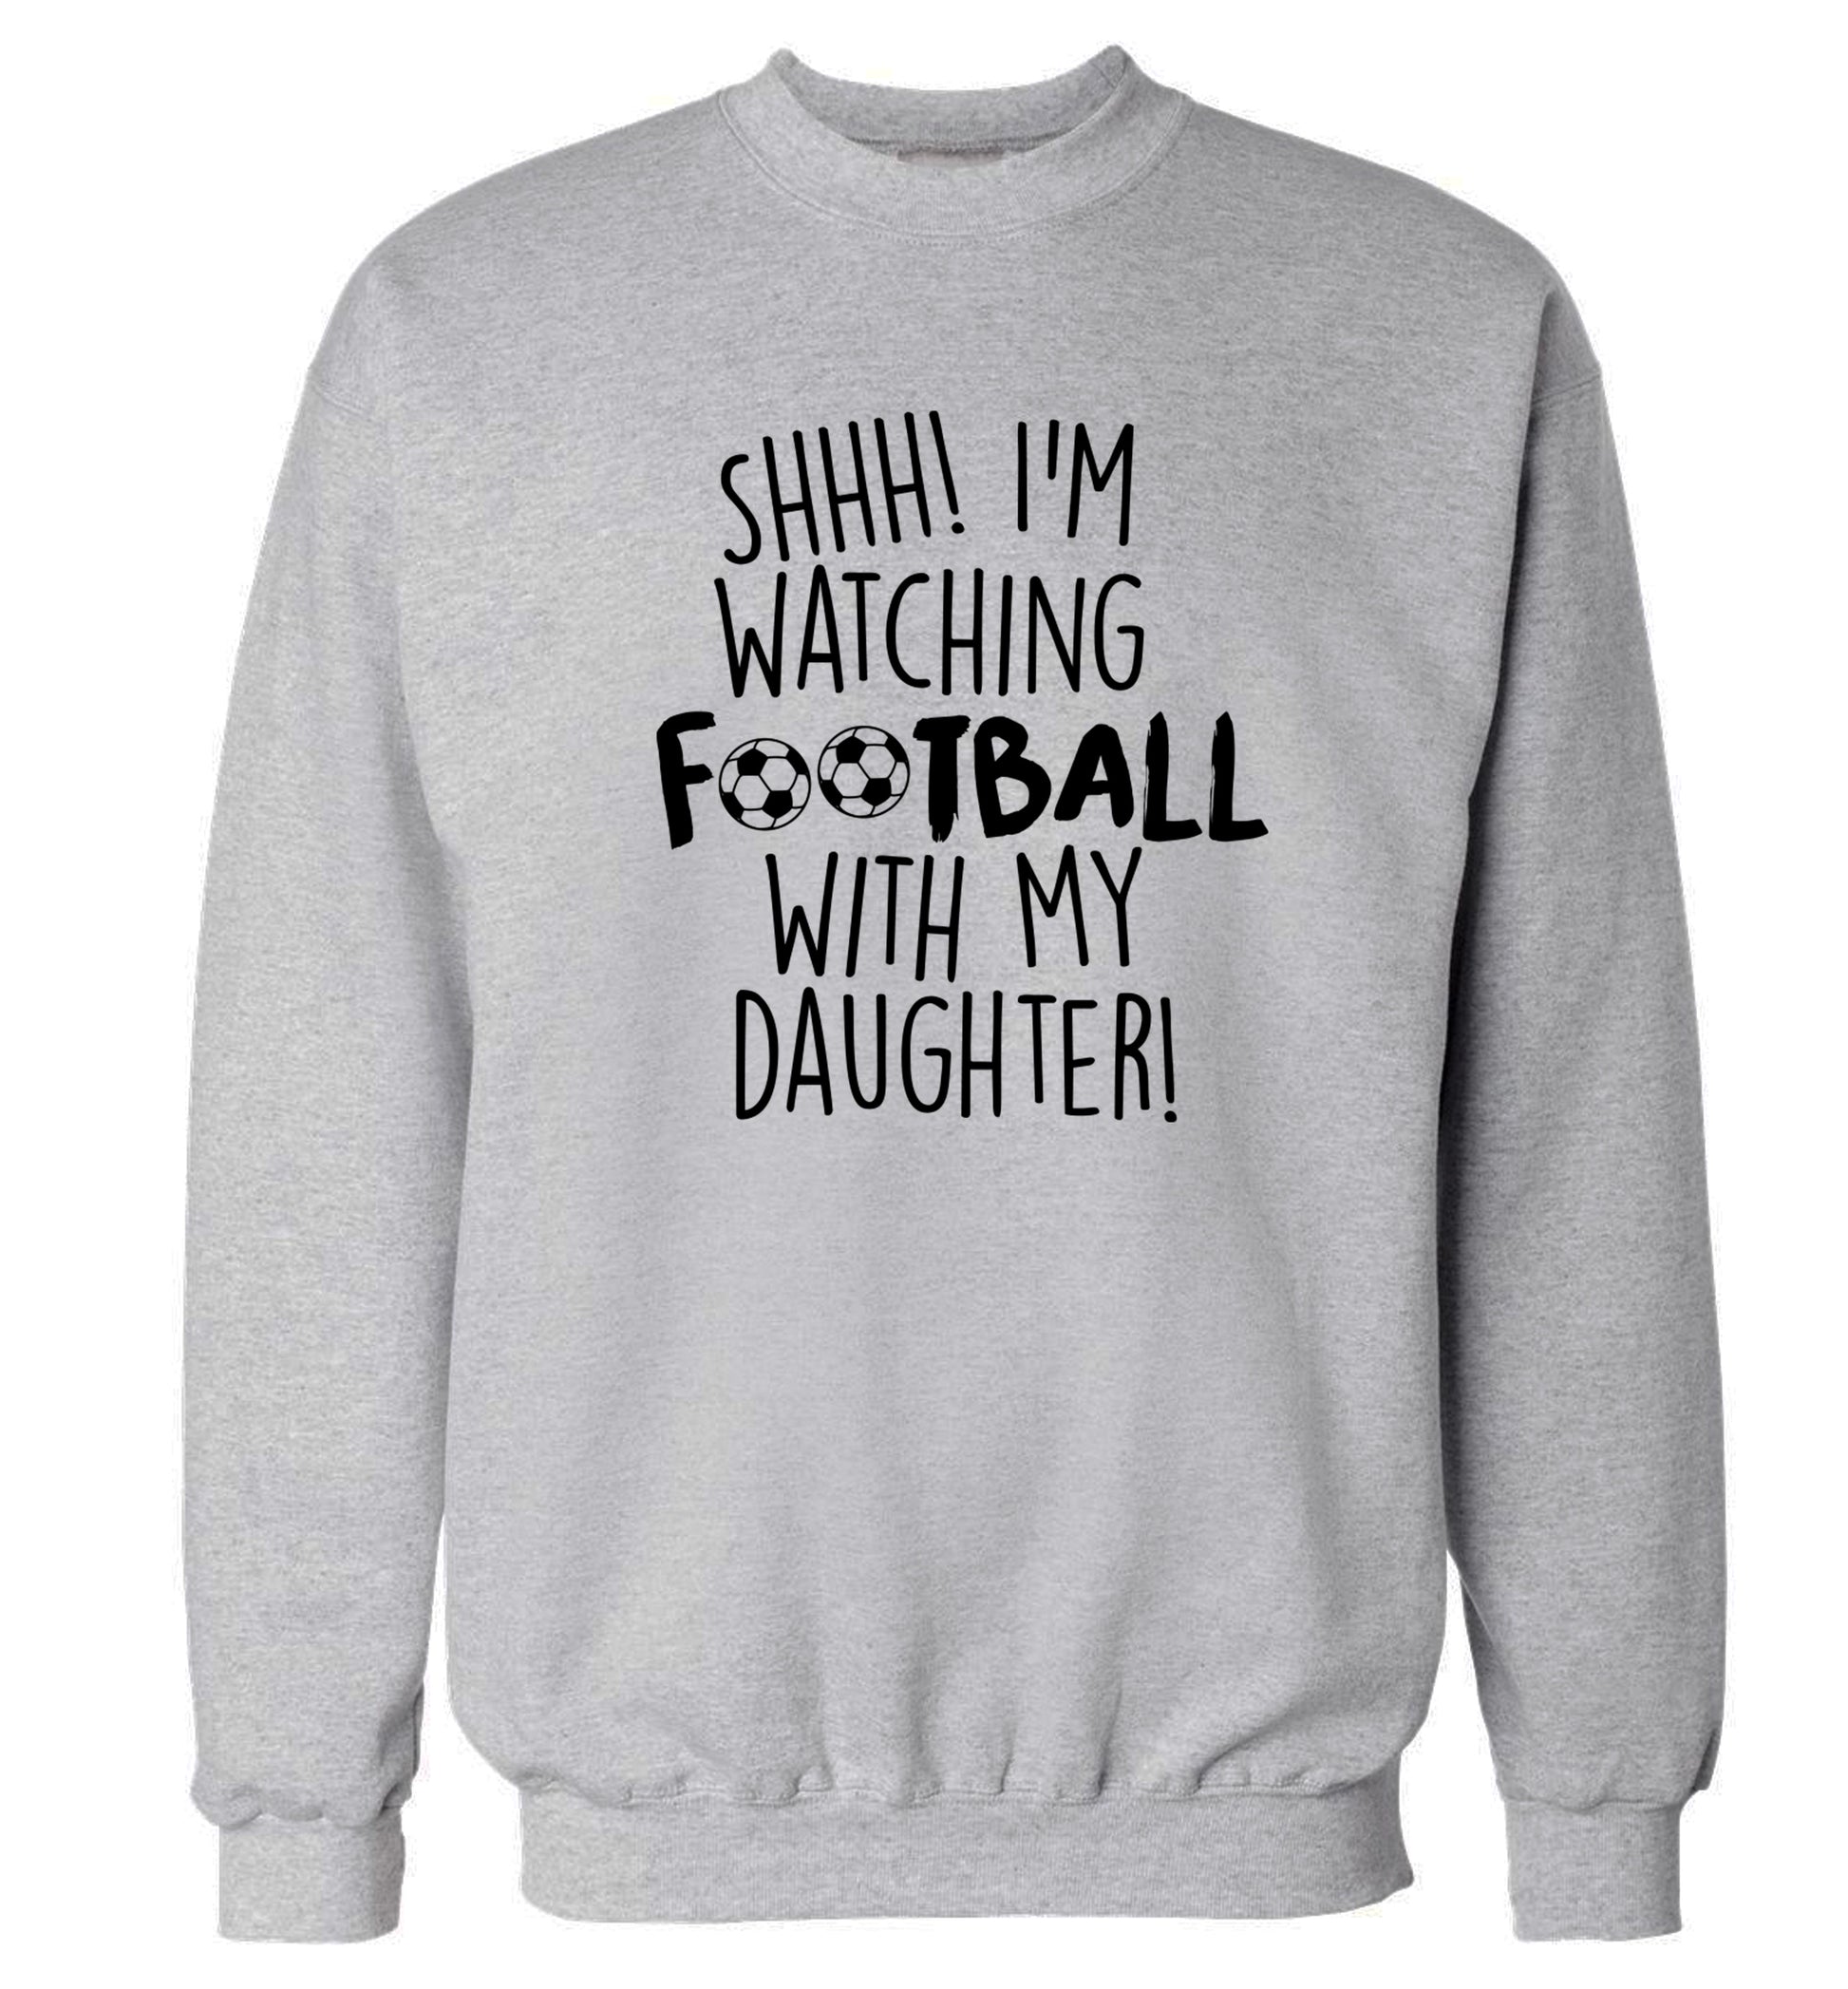 Shhh I'm watching football with my daughter Adult's unisexgrey Sweater 2XL